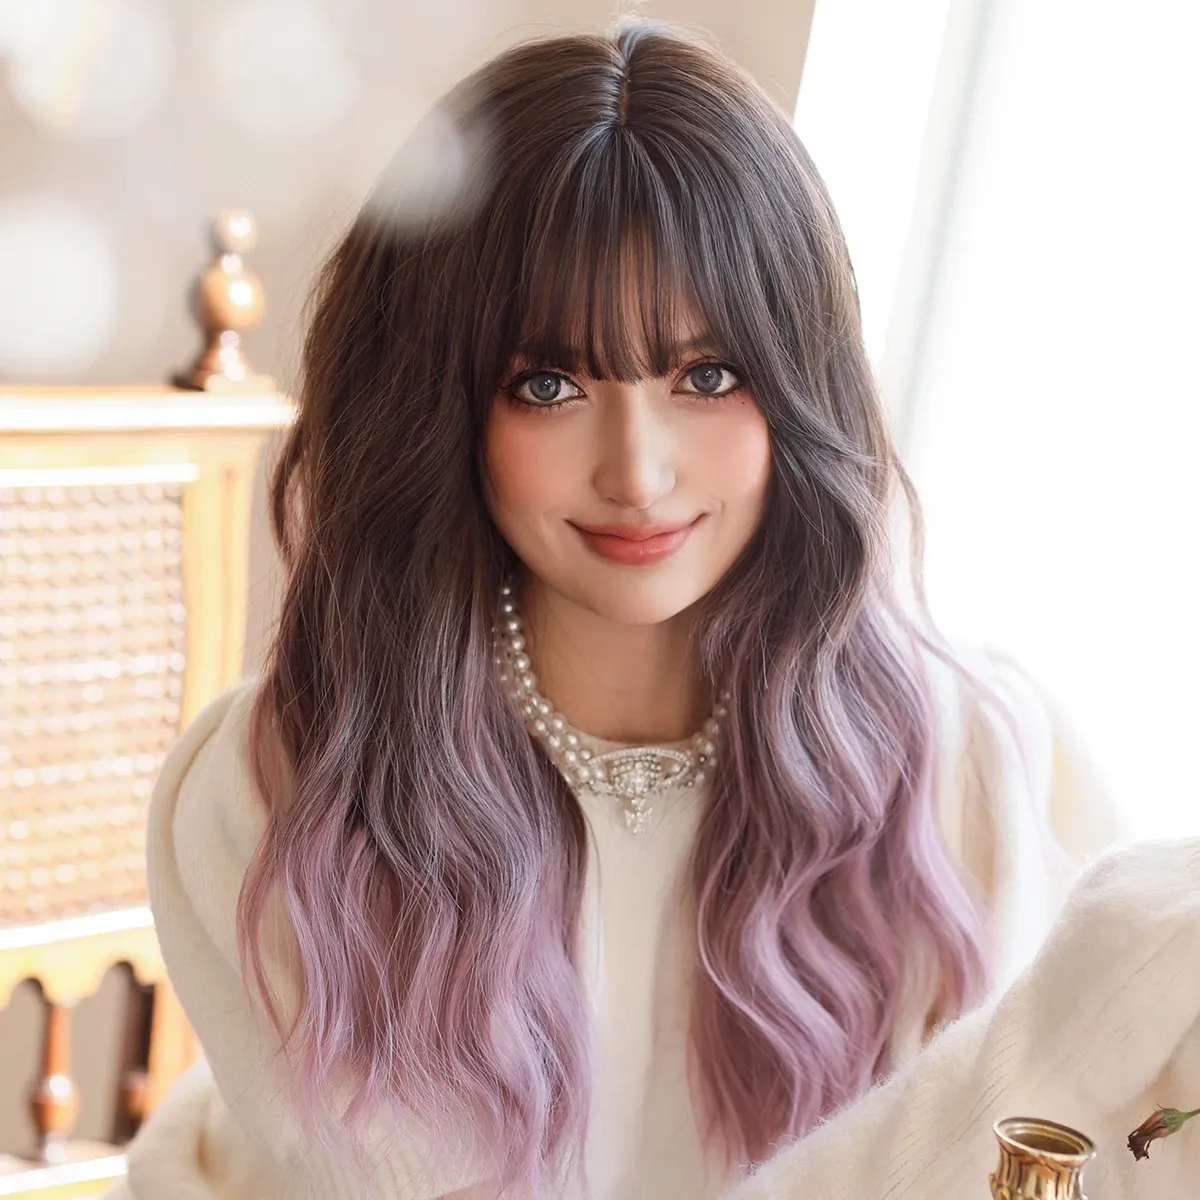 Wigs 7JHH WIGS Long Wavy Ombre Brown Wig for Women Daily Party Natural Looking Synthetic Purple Hair Wigs with Bangs High Quality